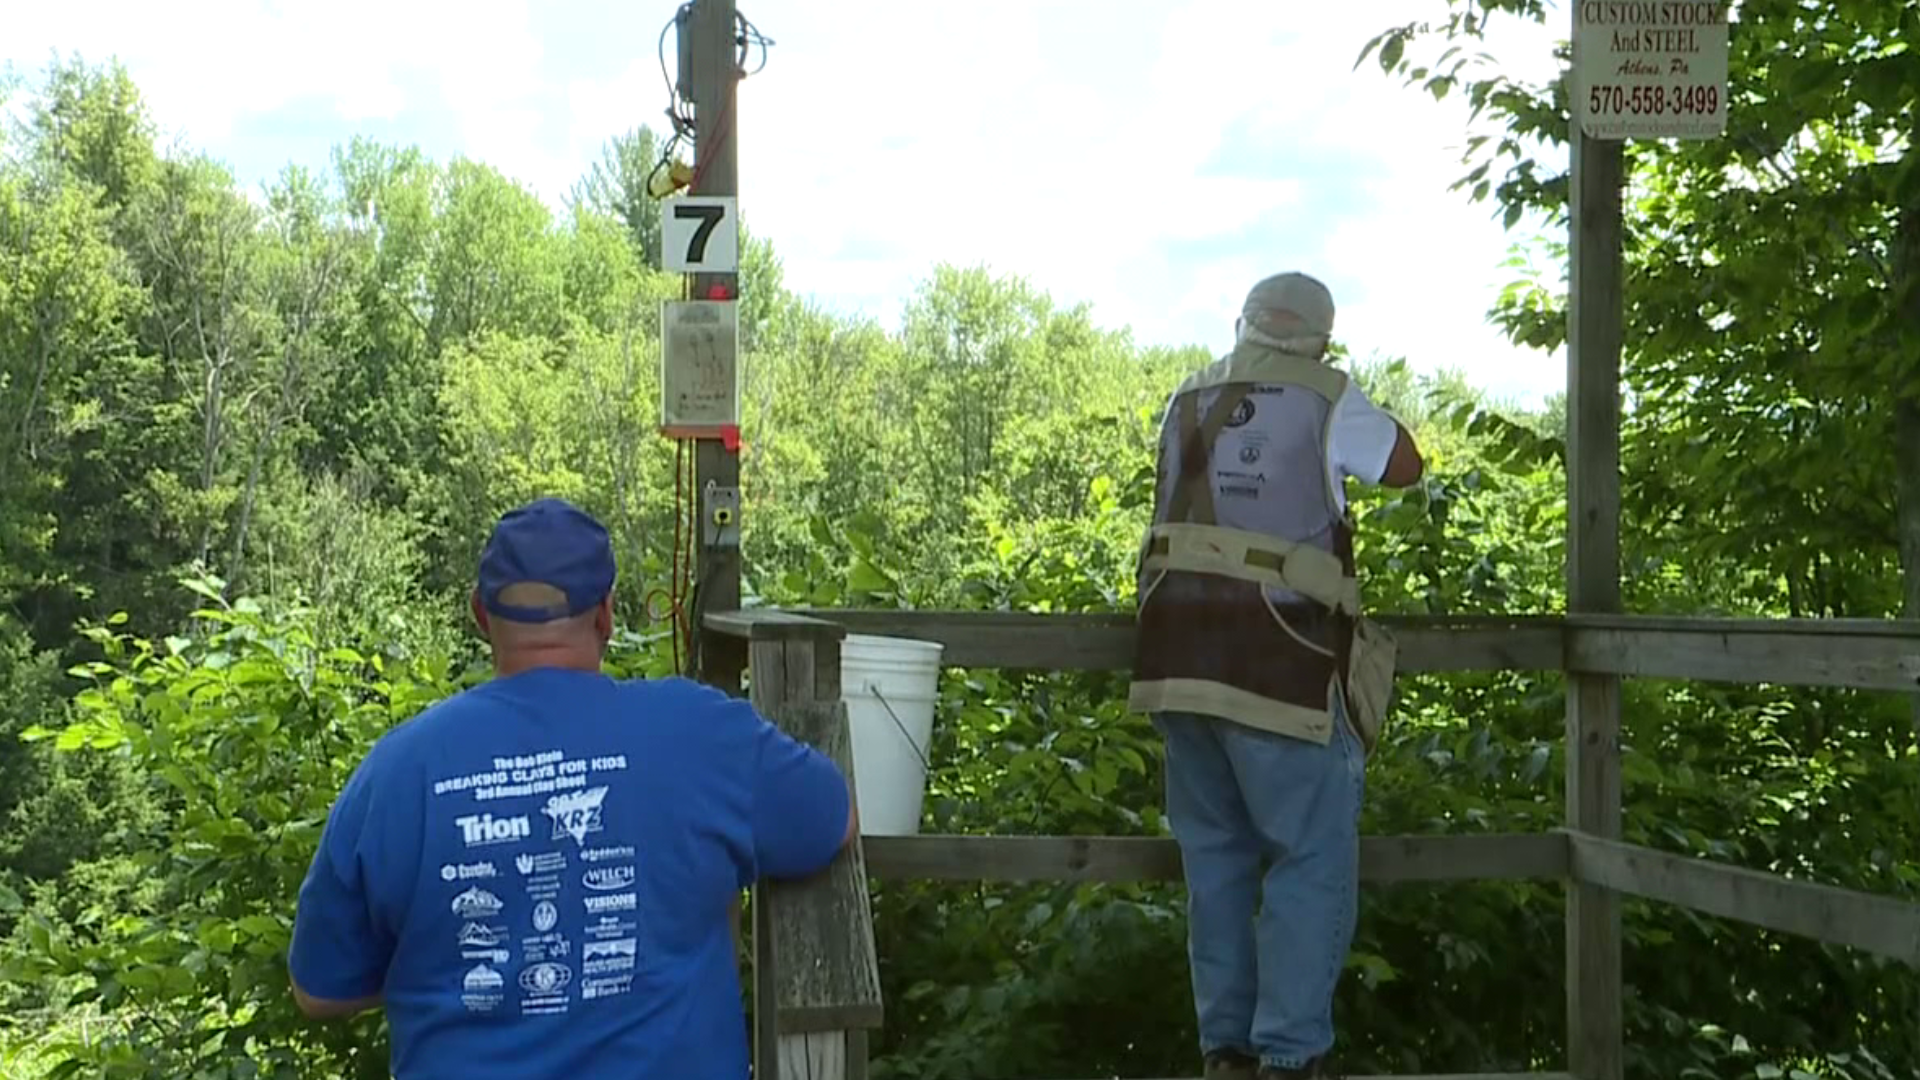 Clay shooting is providing outdoor activities for some but charities are hurting with no large fundraisers allowed to be held on the property.